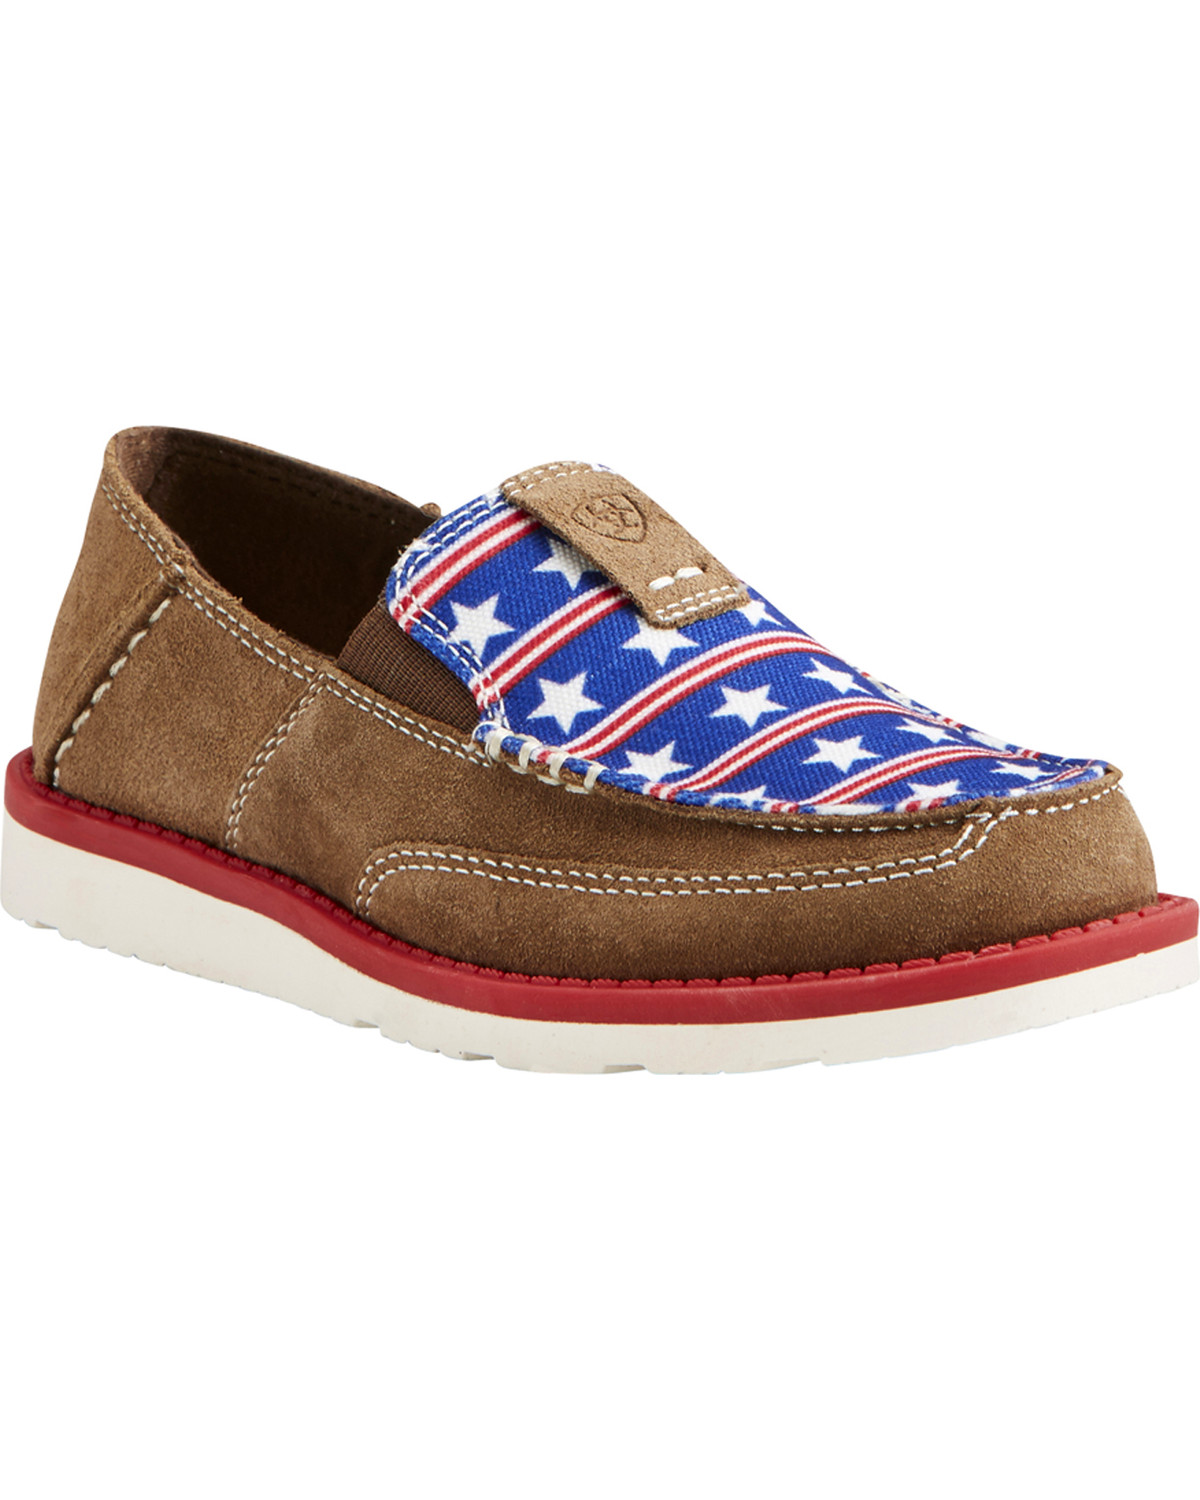 Stars and Stripes Cruiser Shoes | Sheplers